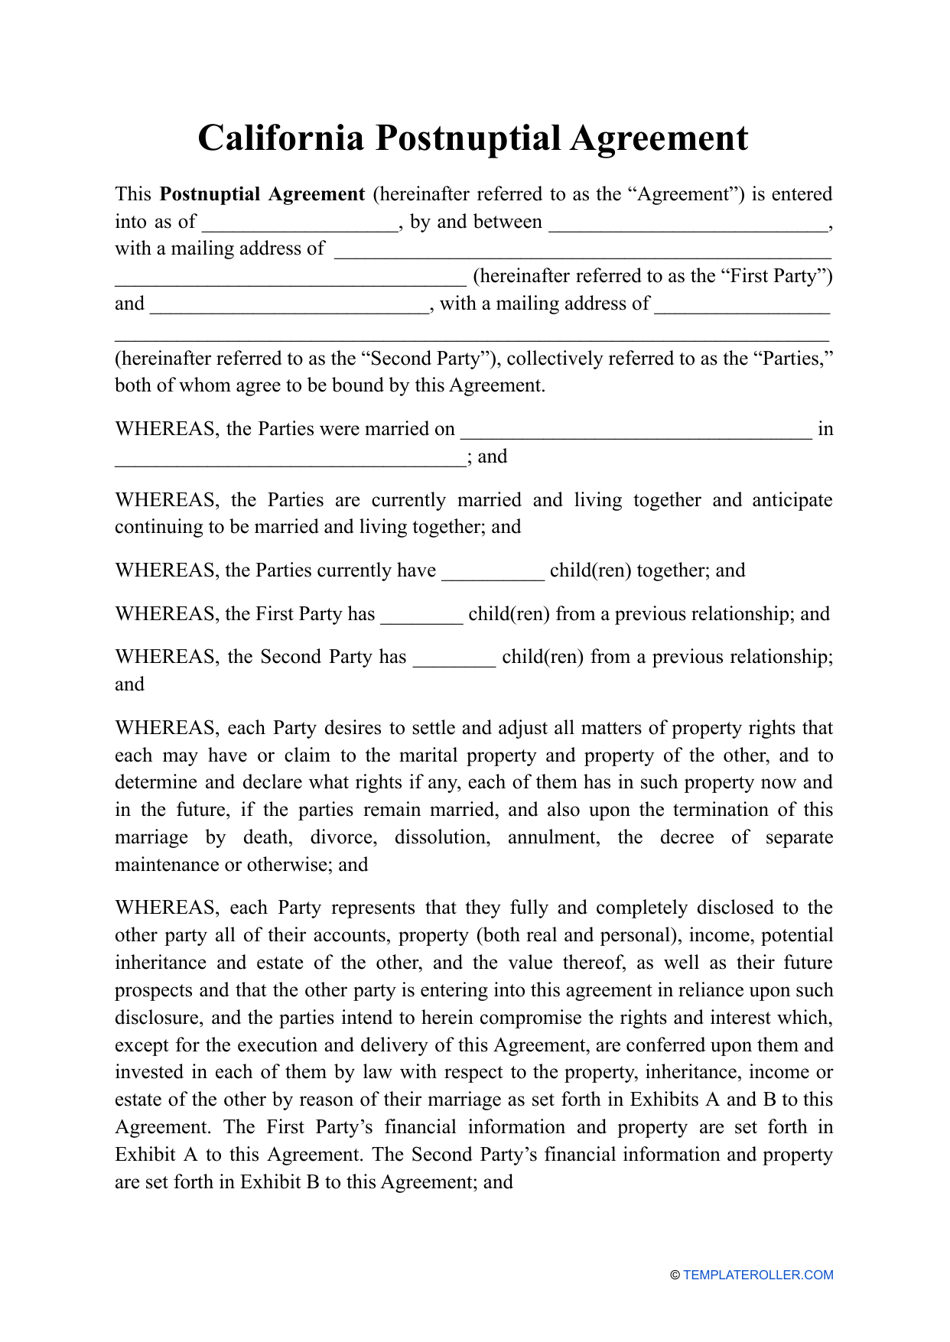 Postnuptial Agreement Template - California, Page 1